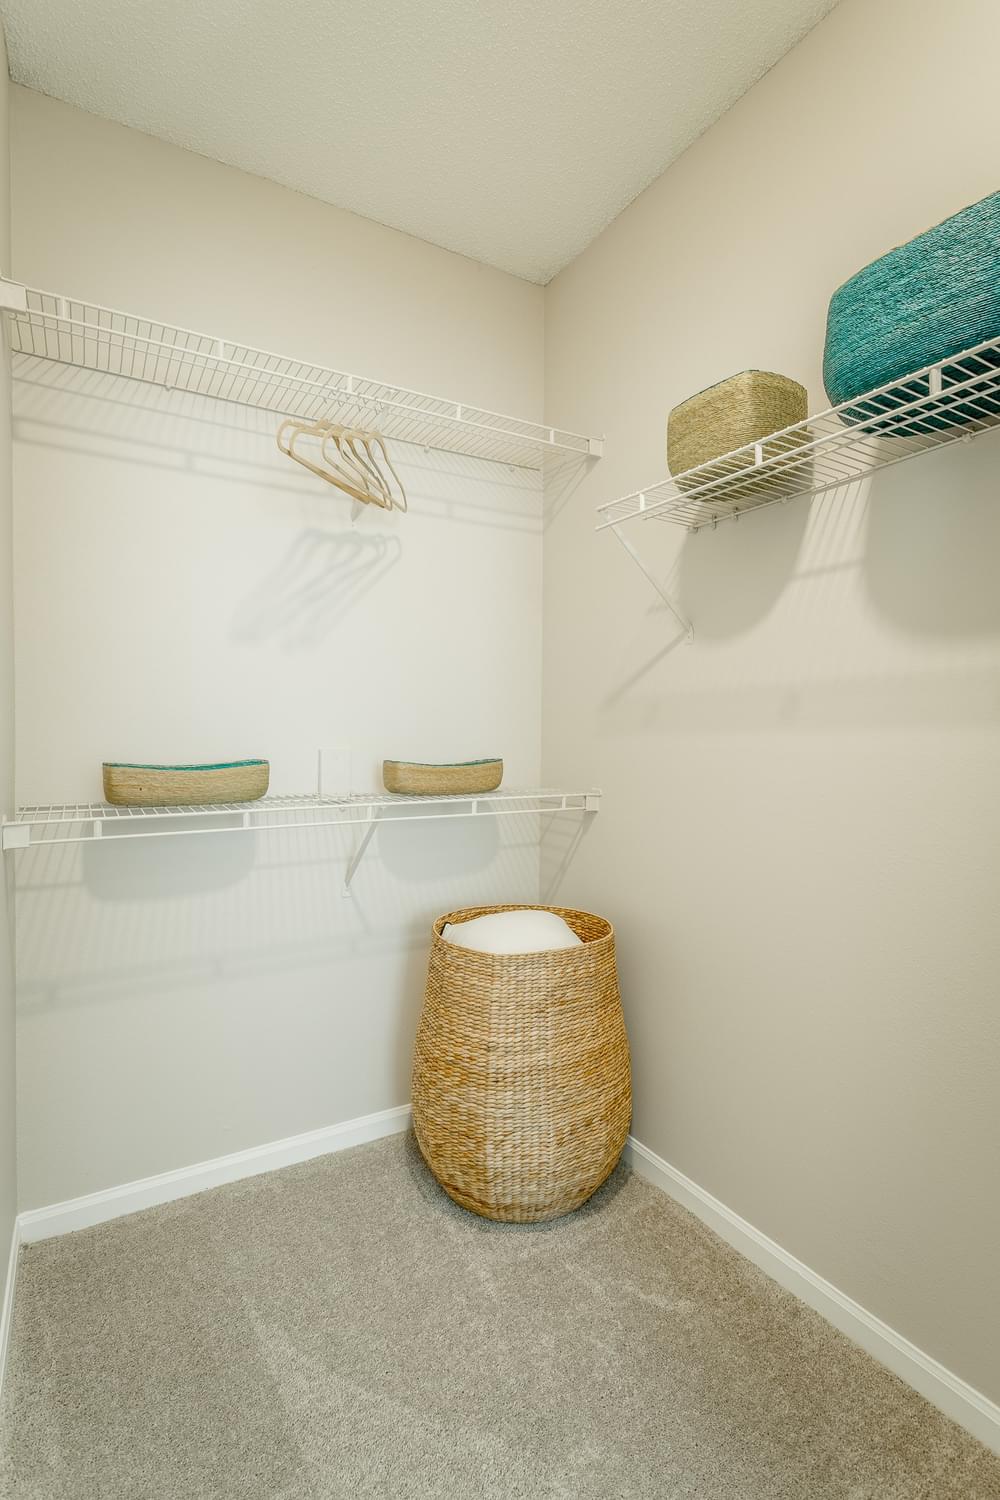 a closet with shelves and baskets and a basket on the floor